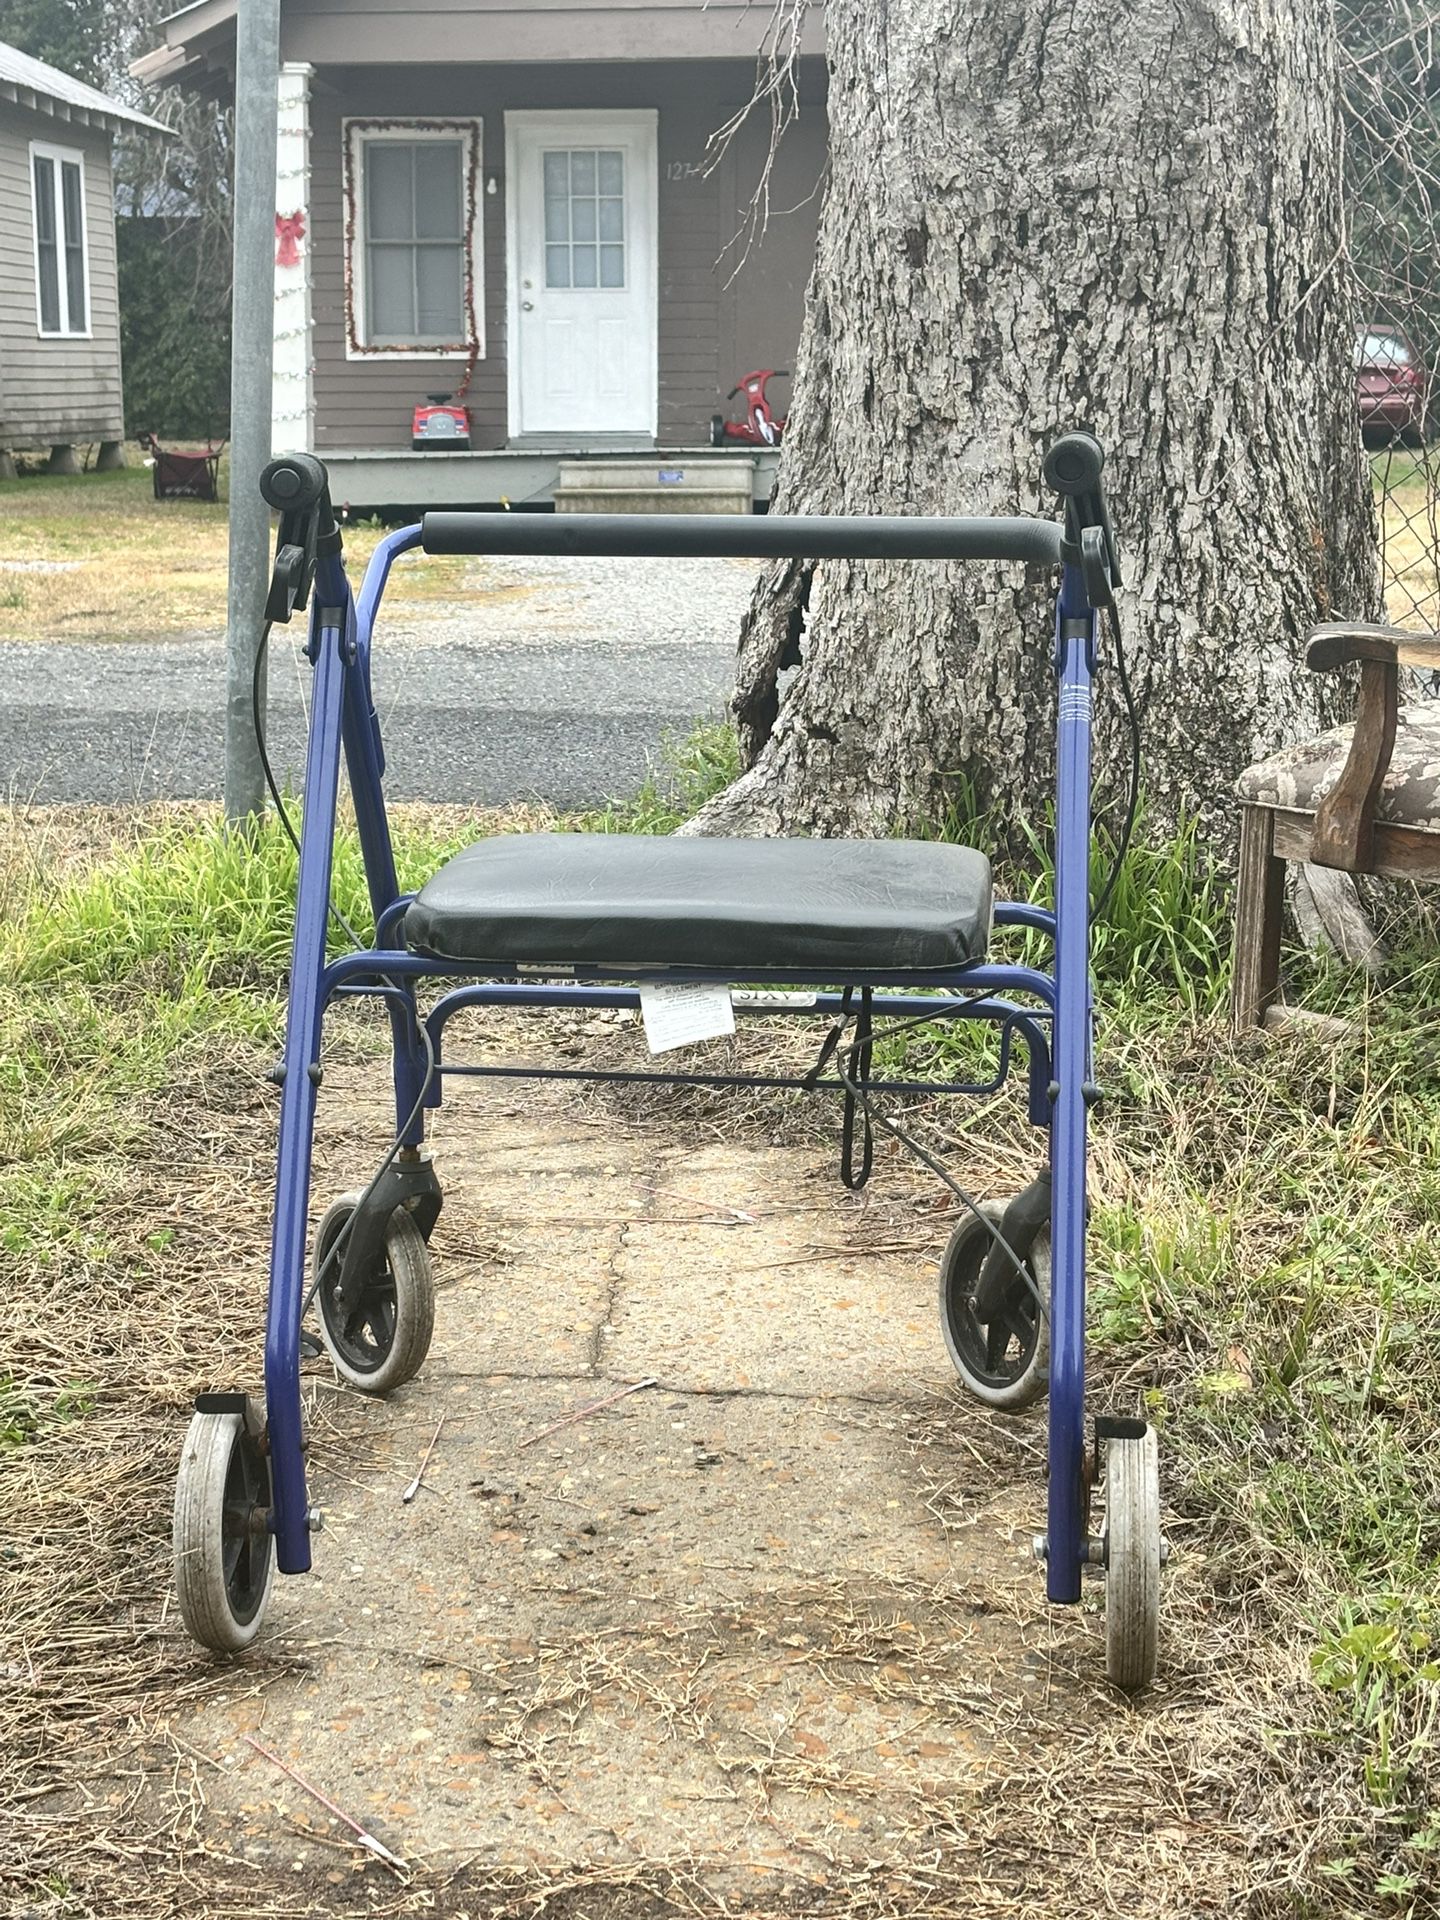 Walker with seat (Brakes don’t work)